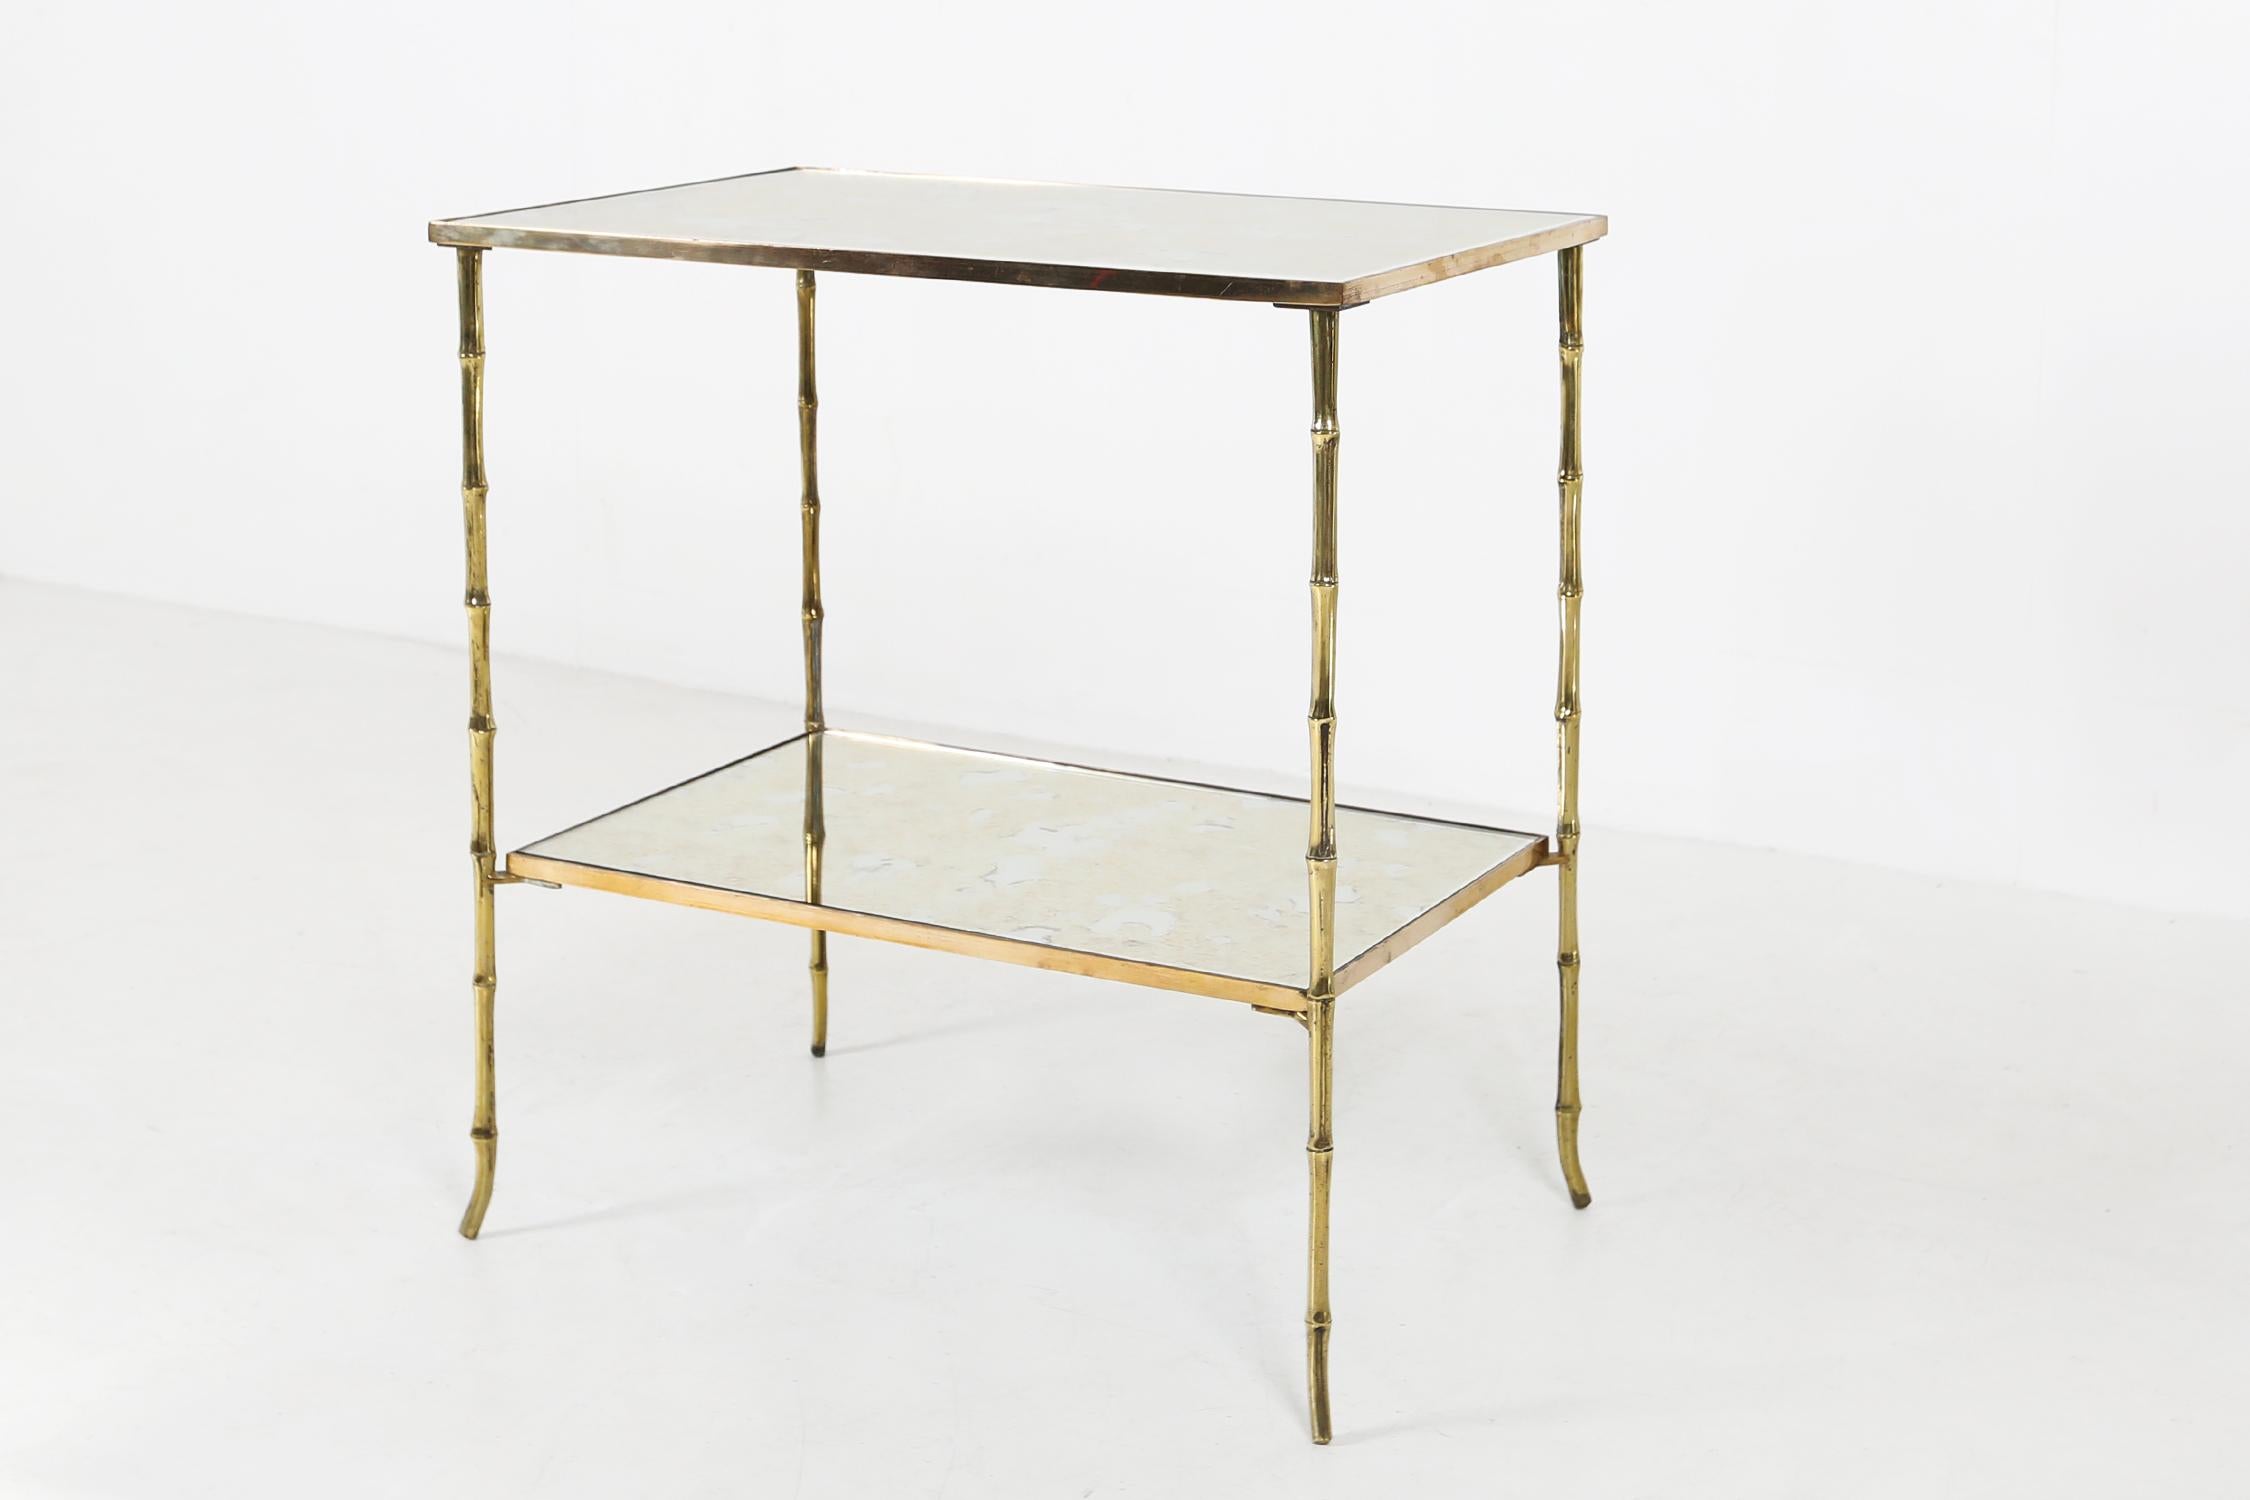 Bronze coffee table by Maison Bagues Ca.1960.
With bronze frame and smoked glass.